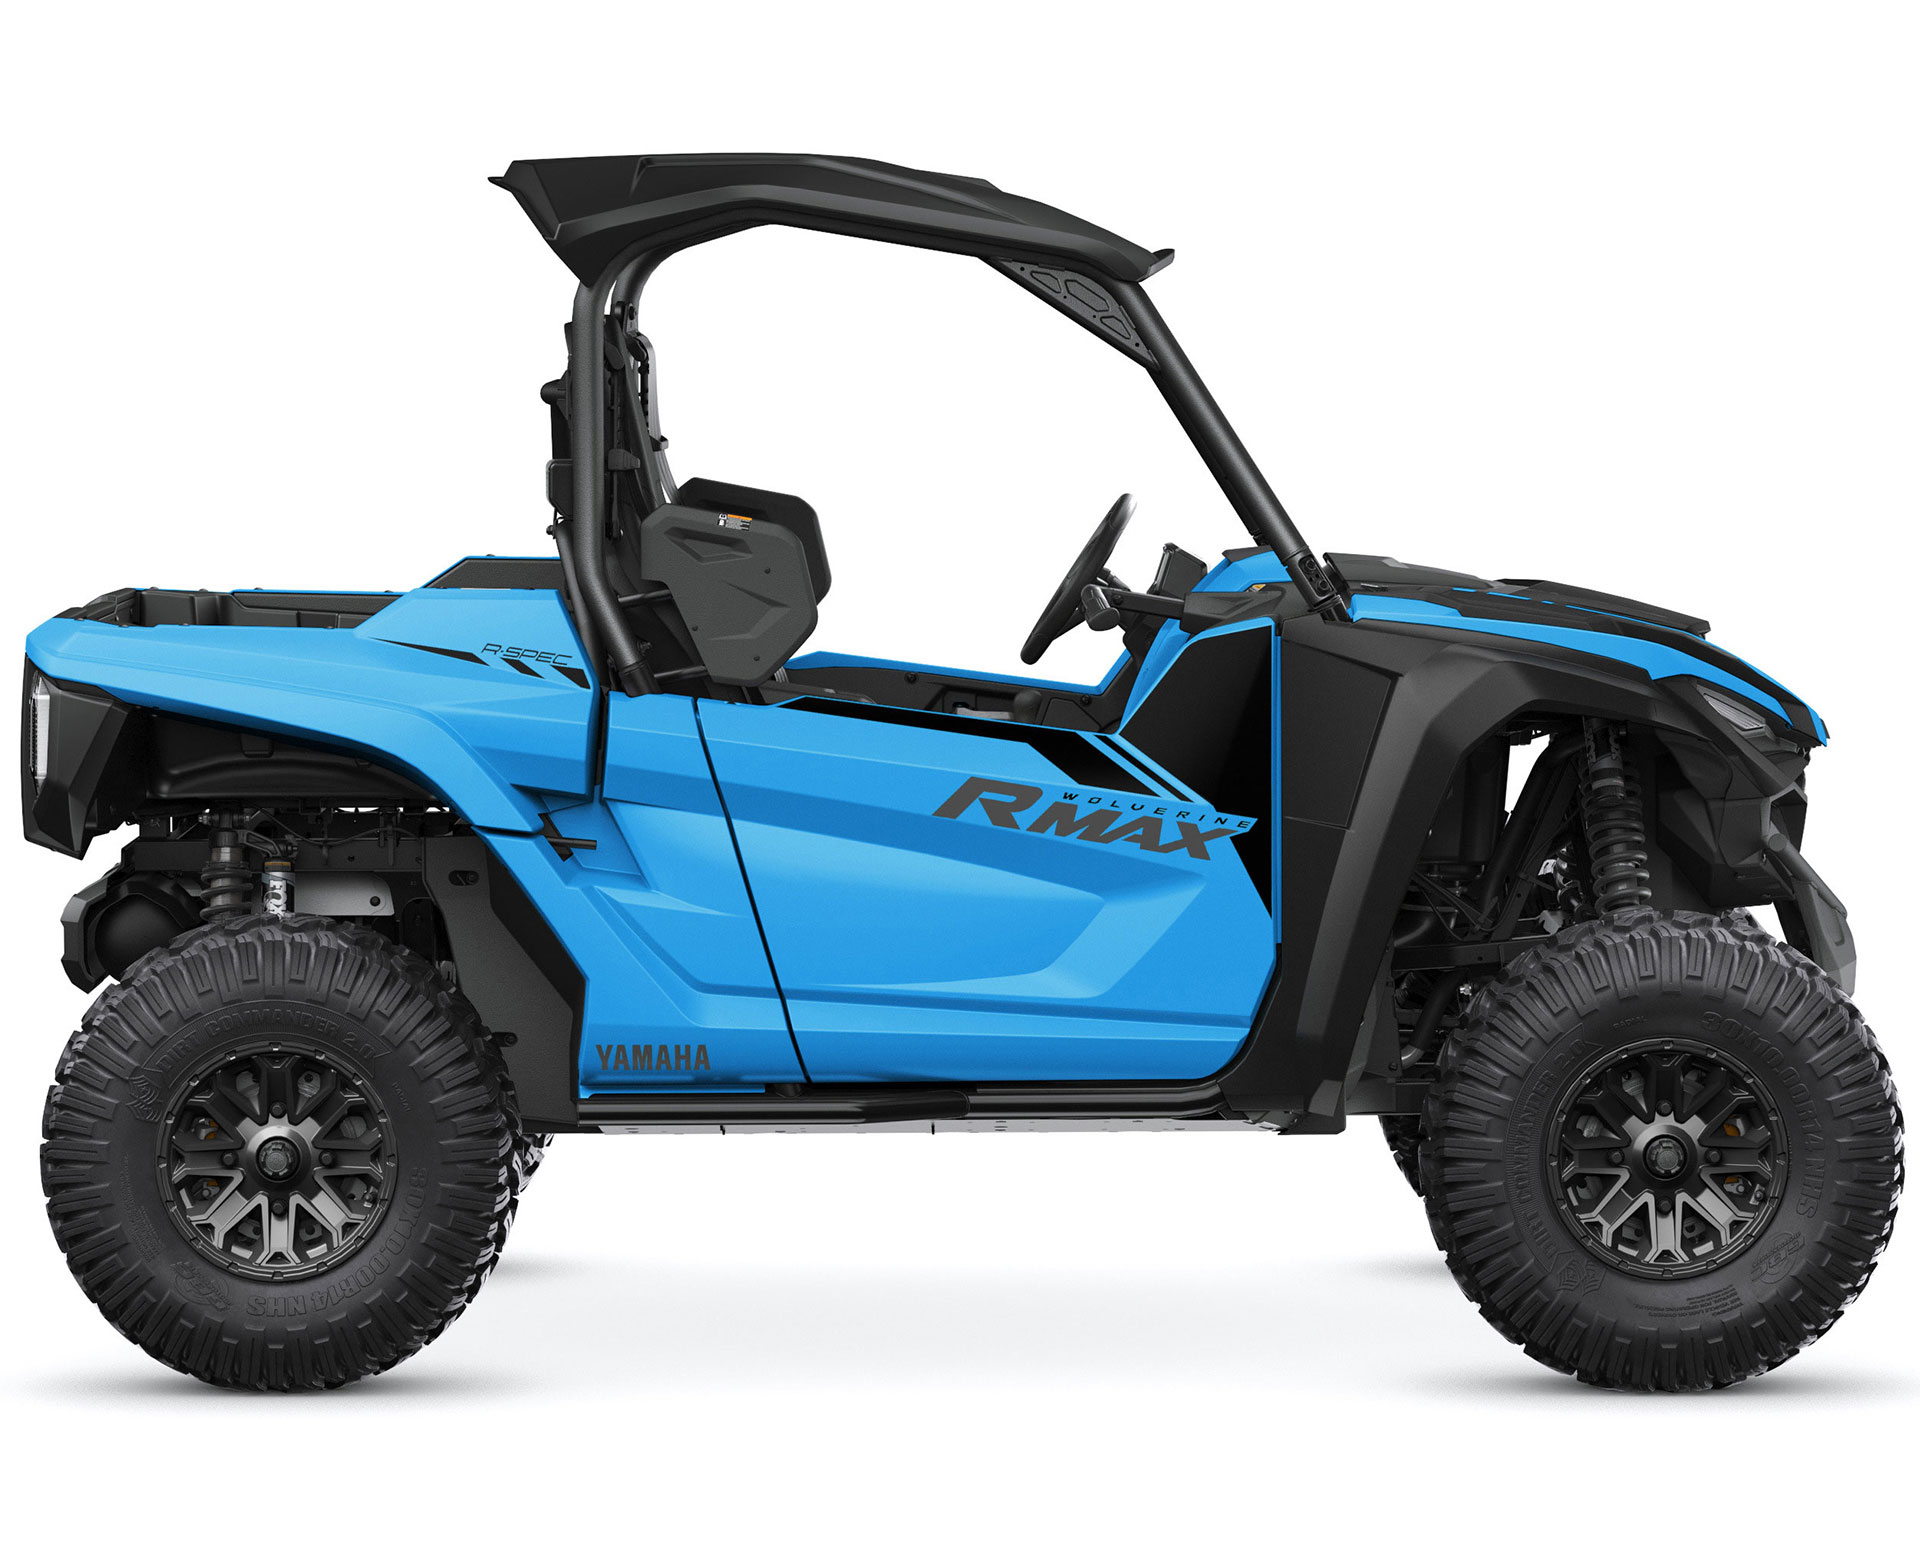 Thumbnail of your customized 2023 WOLVERINE® RMAX2™ 1000 R-SPEC